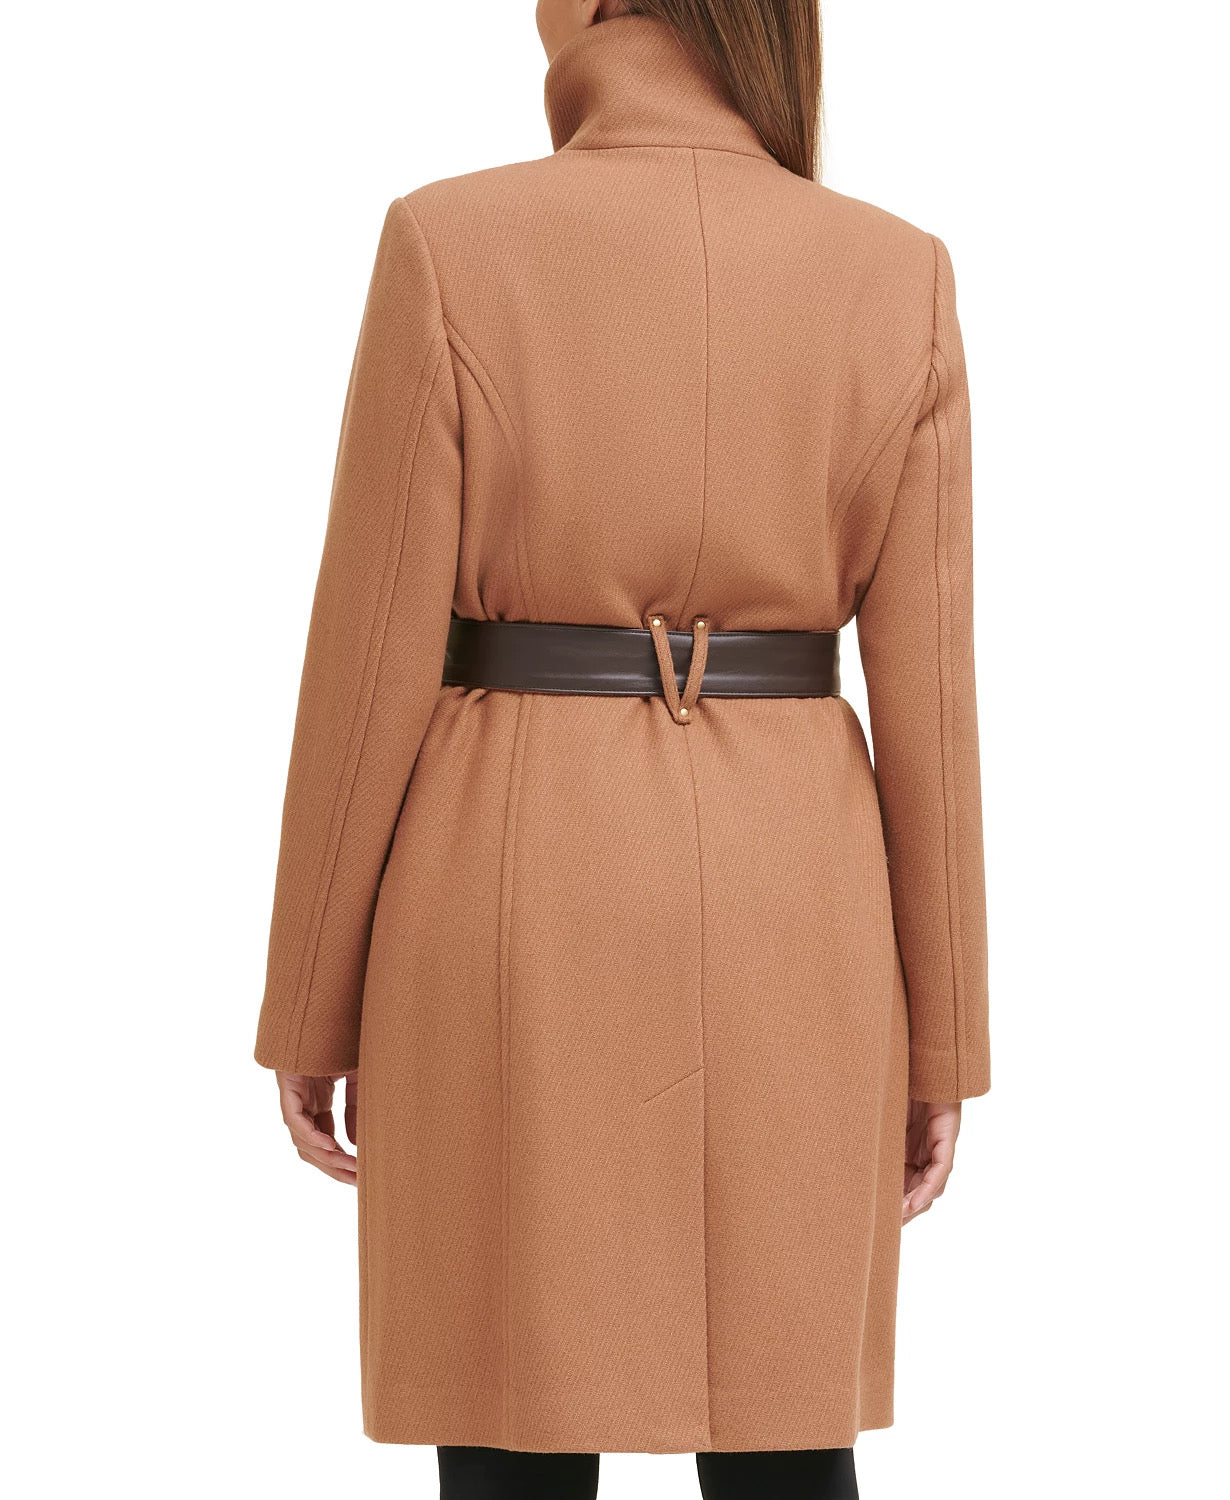 Cole Haan Women's Belted Single-Breasted Wrap Coat Camel Brown Size 6